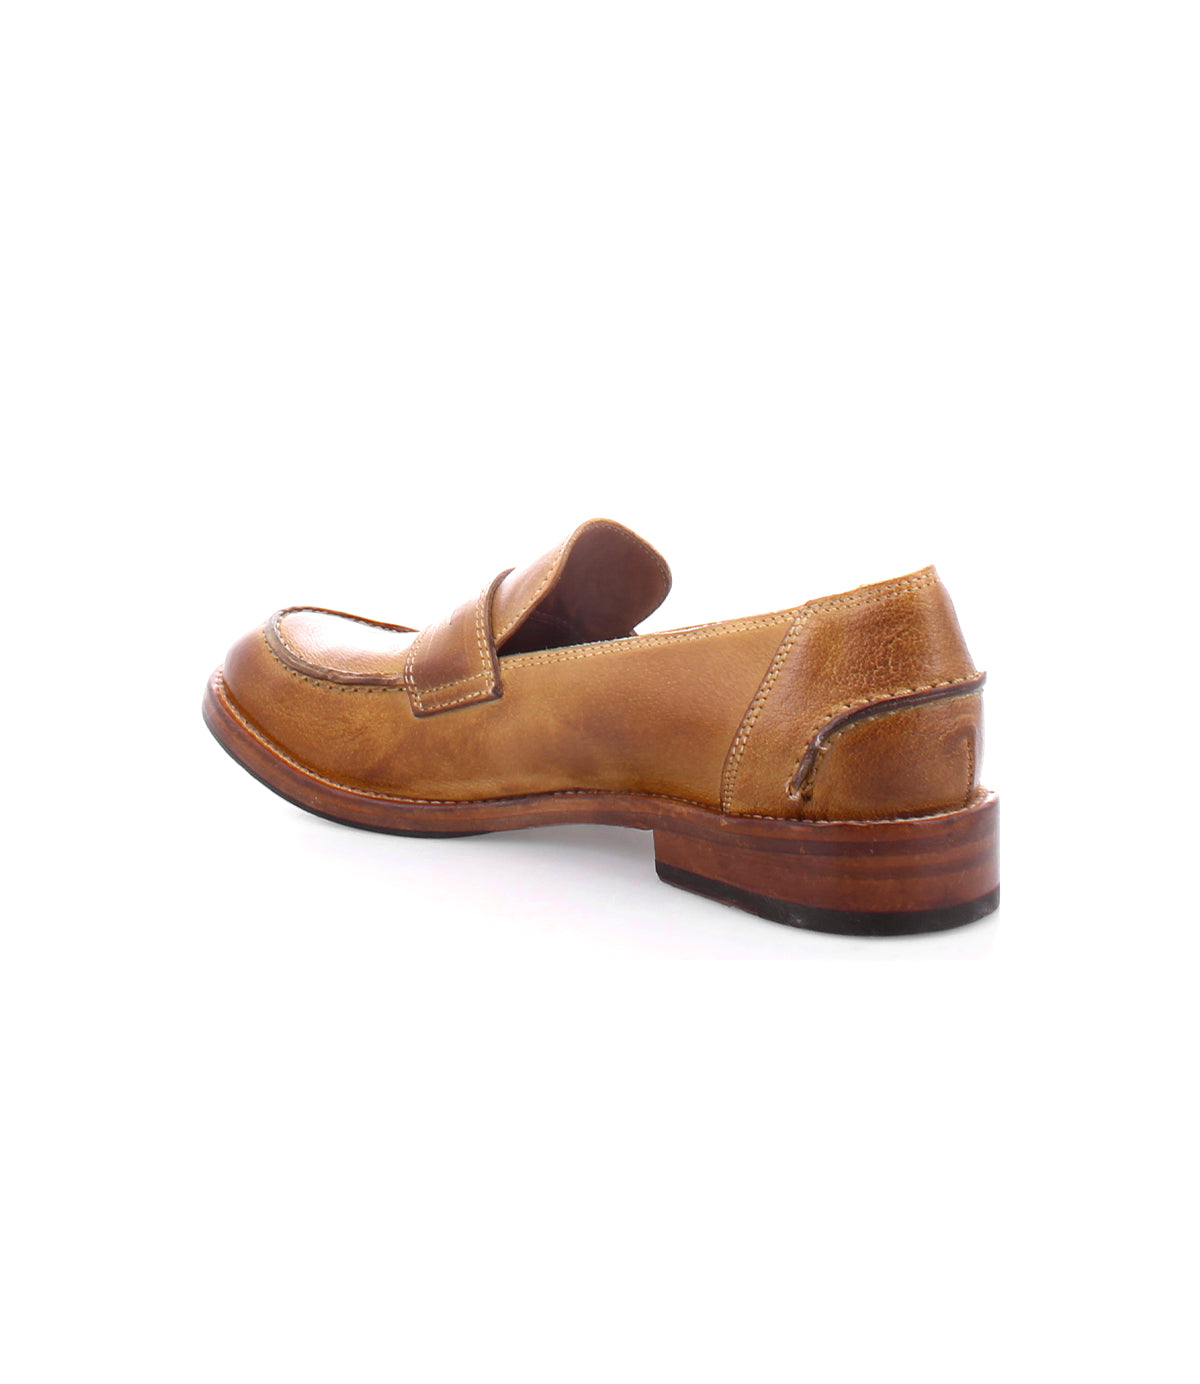 A men's penny loafer in Italian leather with a distressed finish, called Bonus and made by Bed Stu.